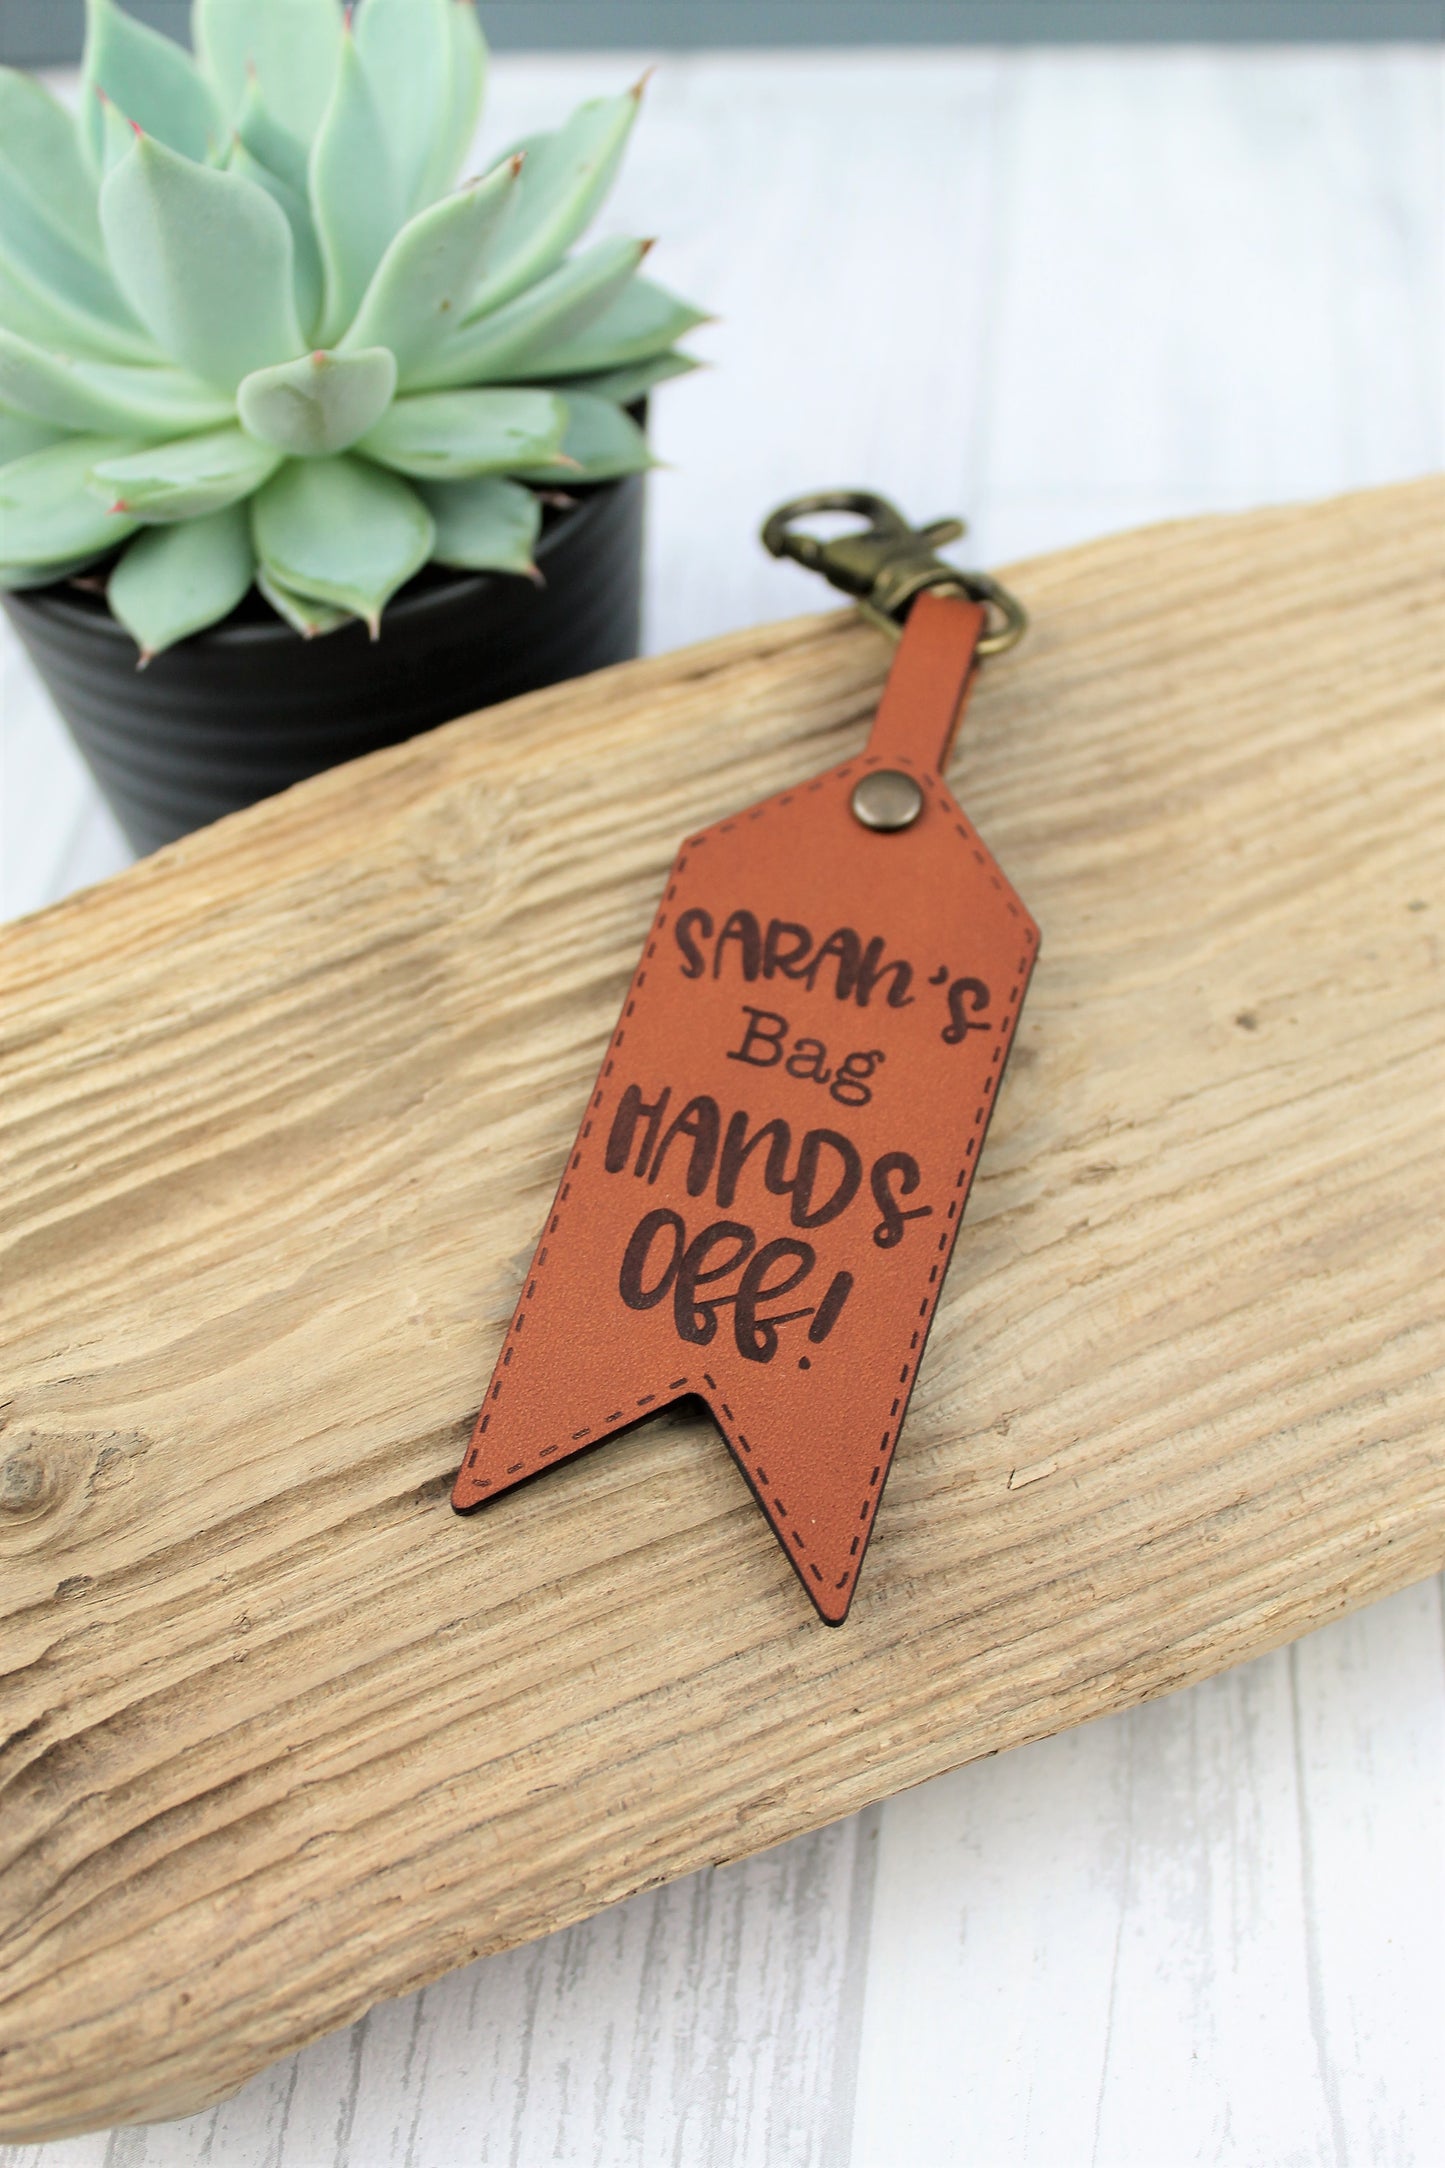 Personalised Funny Leather Luggage Tag - Hands Off!